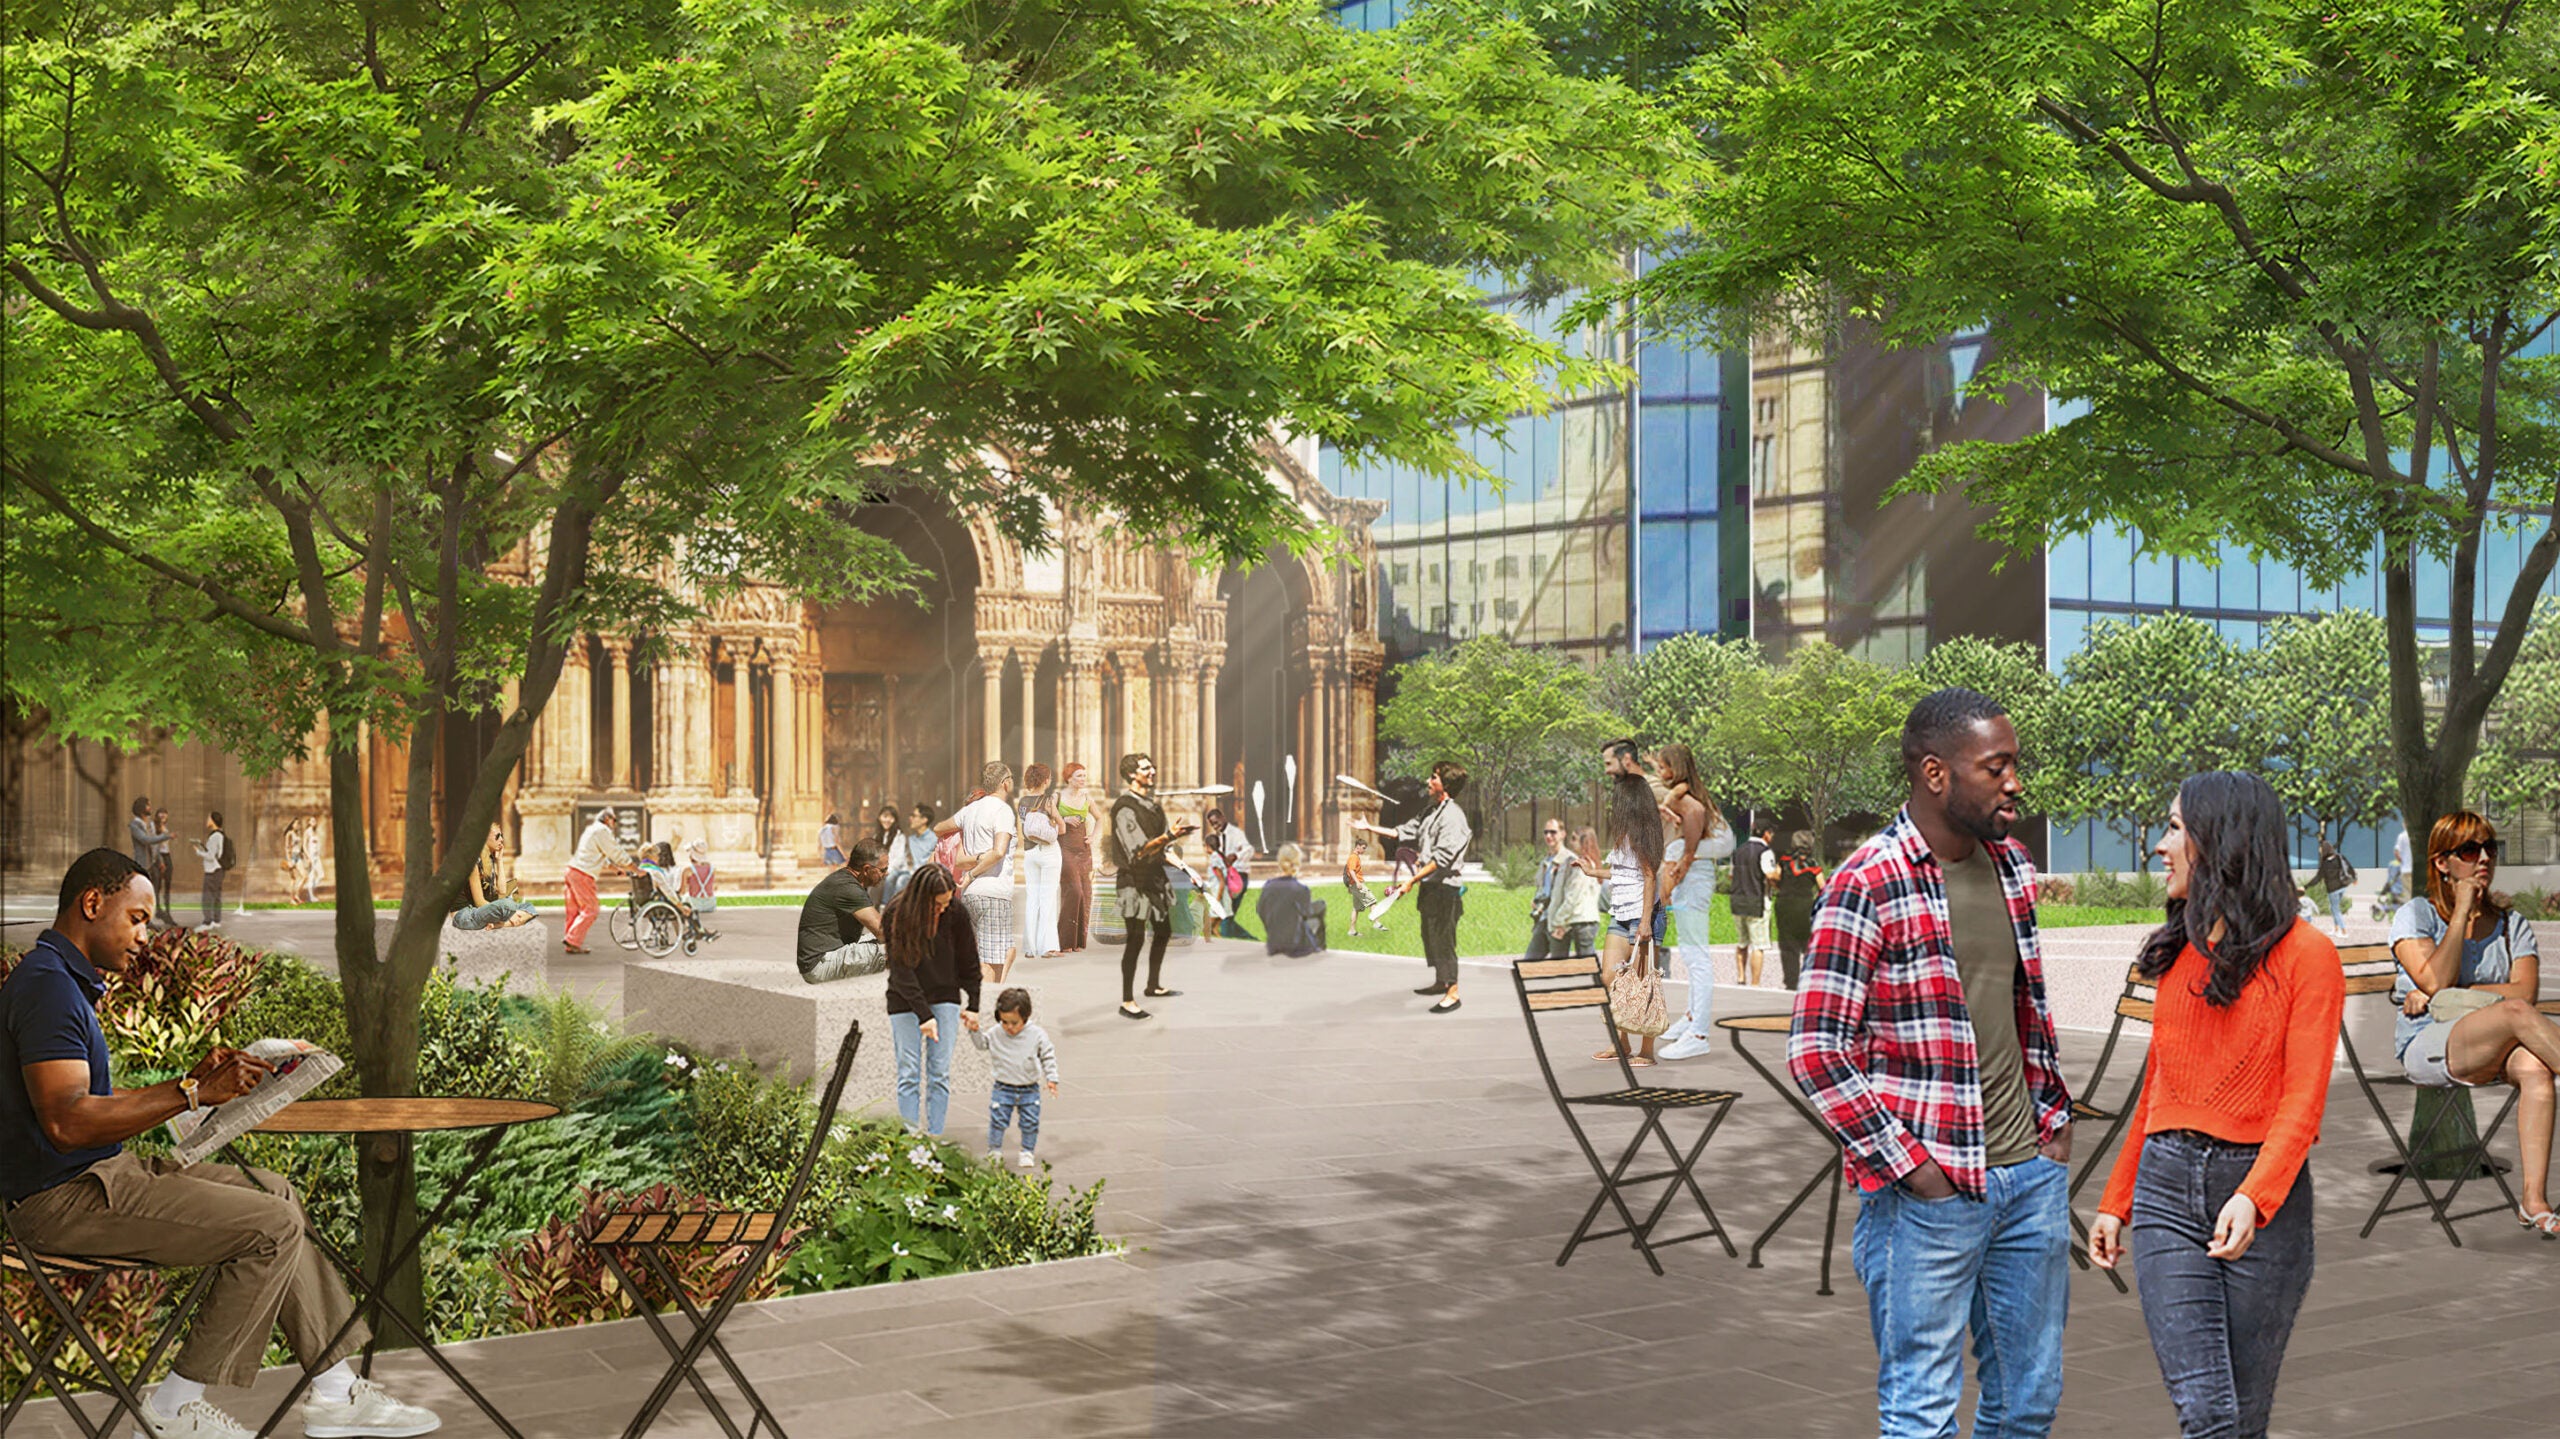 New Copley Square design will emphasize event space, greenery